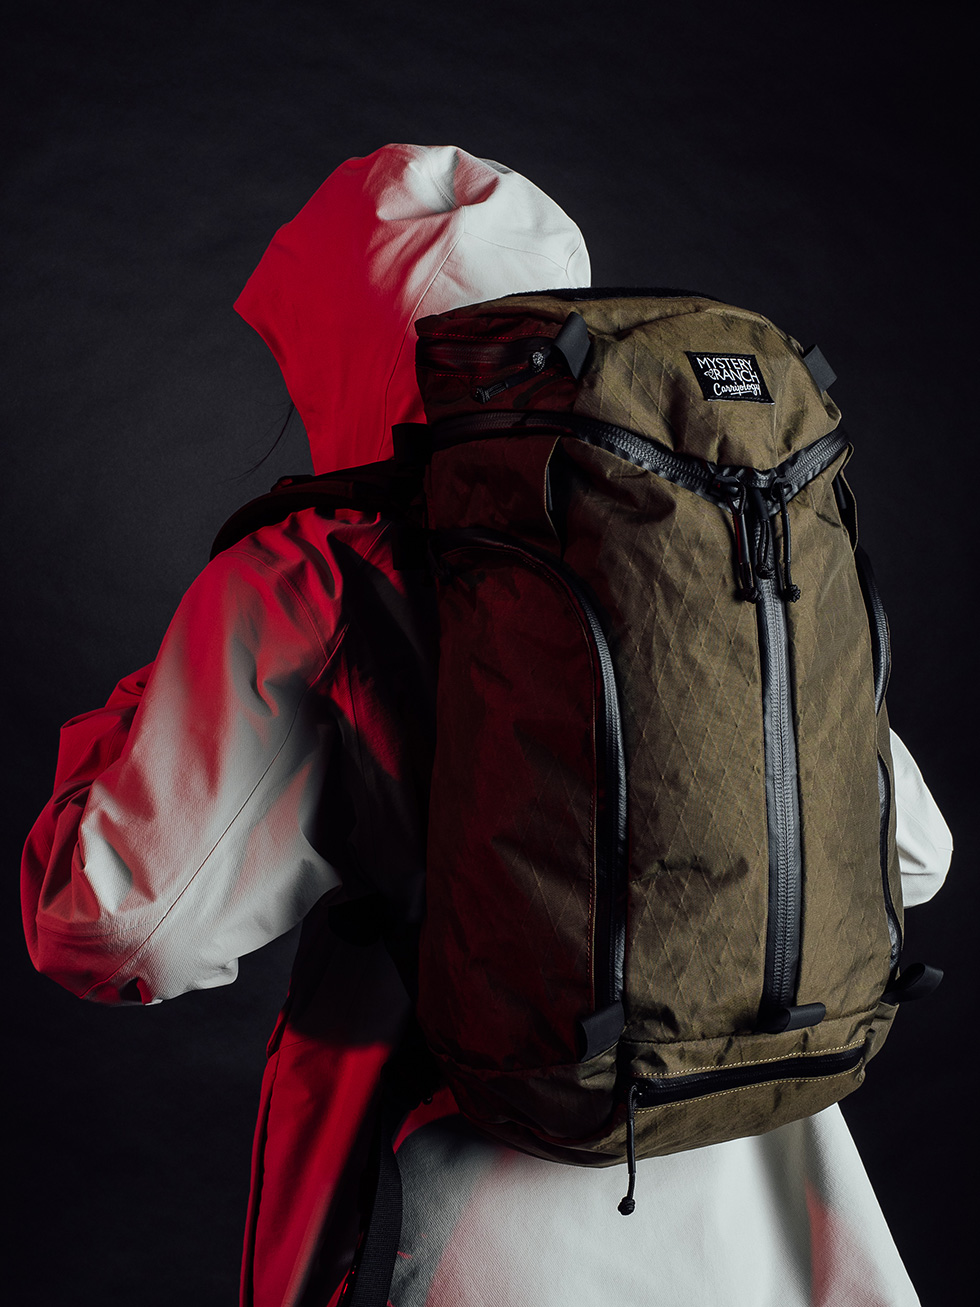 Mystery Ranch x Carryology | The Unicorn Returns